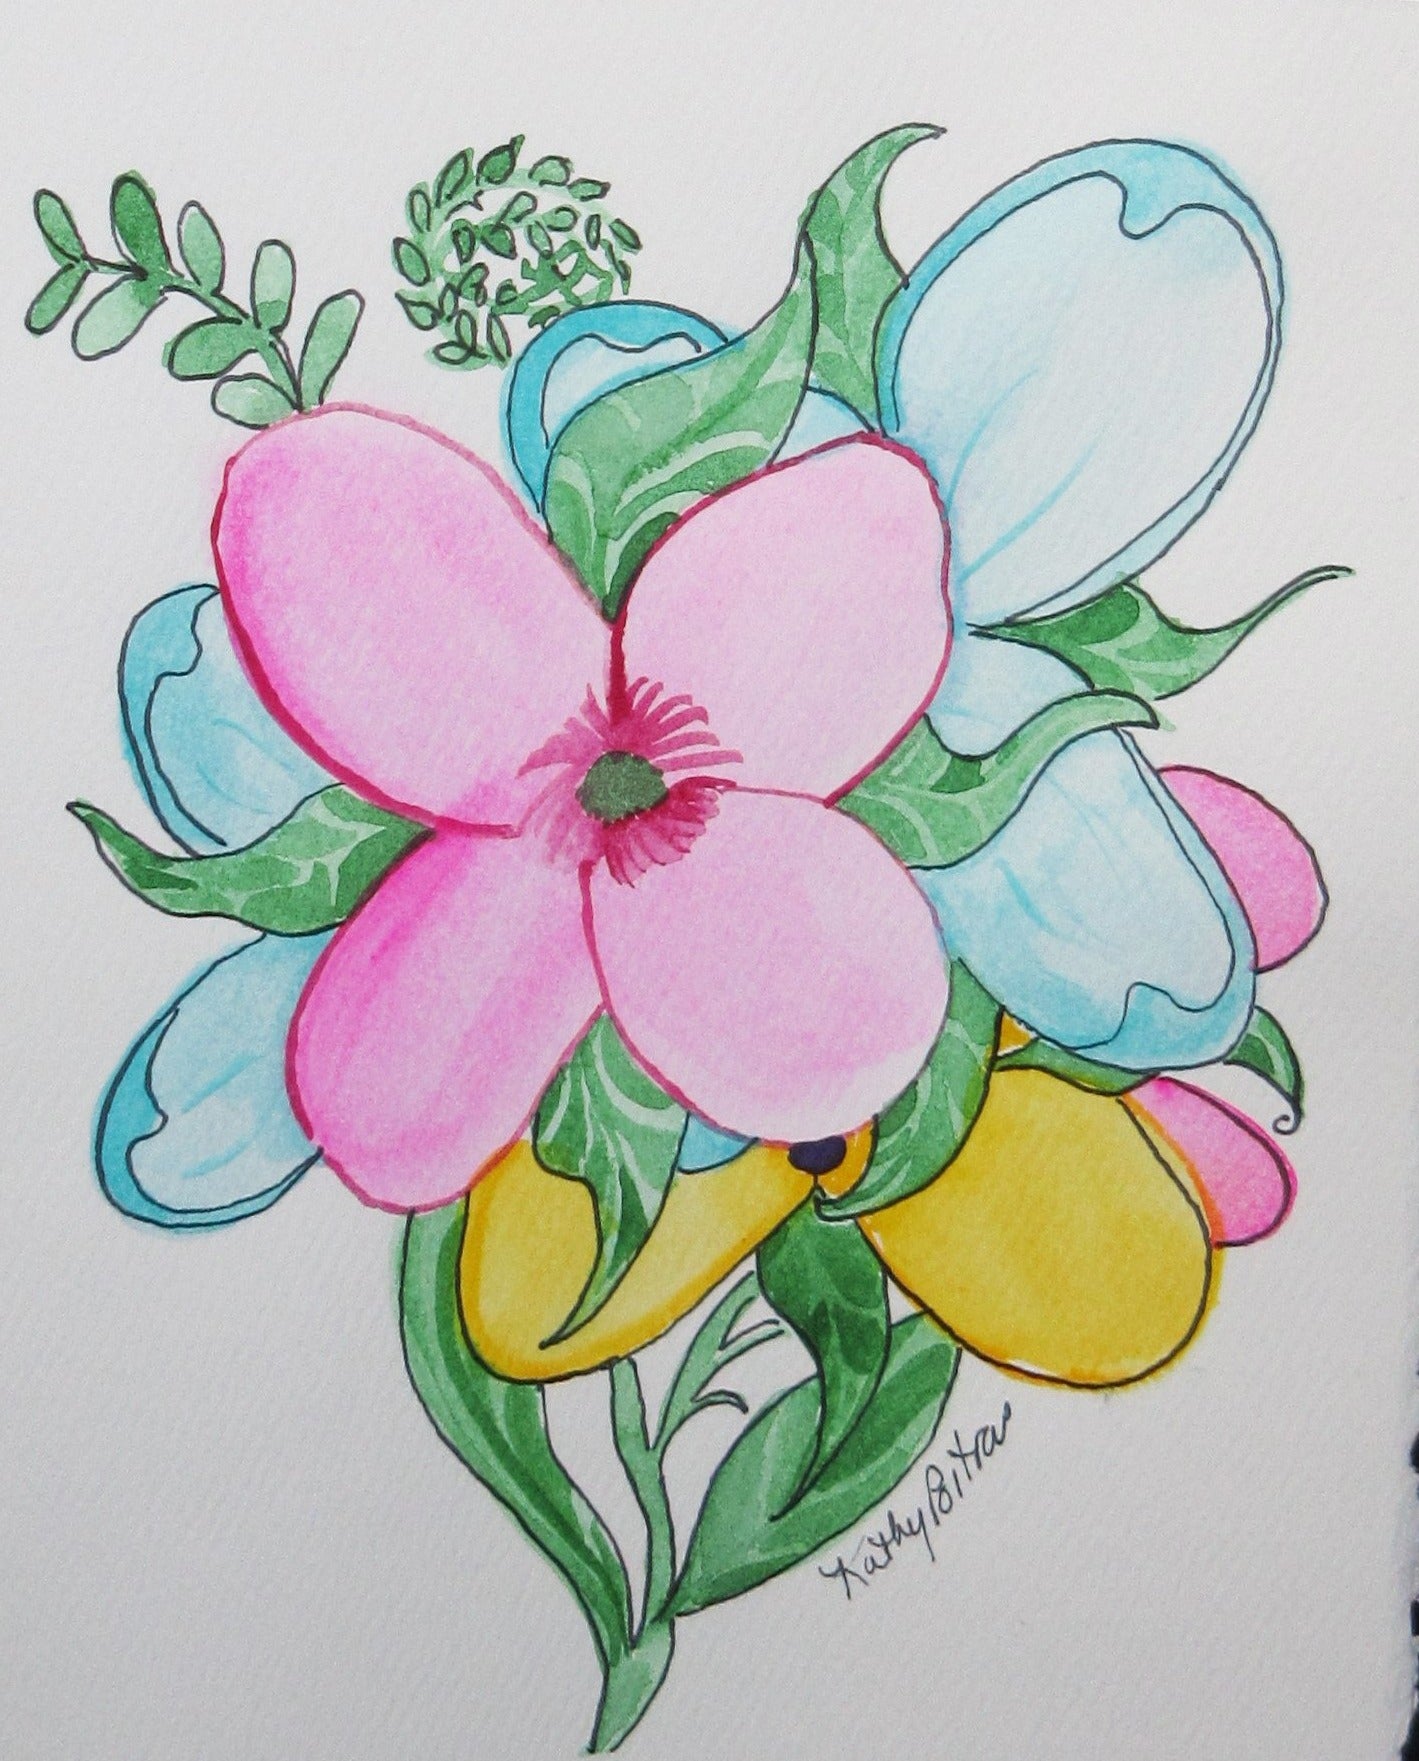 Balloon Flower Bouquet.   Pink, blue and yellow.  5 x 7 inch  watercolor painting on paper.  By Canadian Folk Artist Kathy Poitras. 